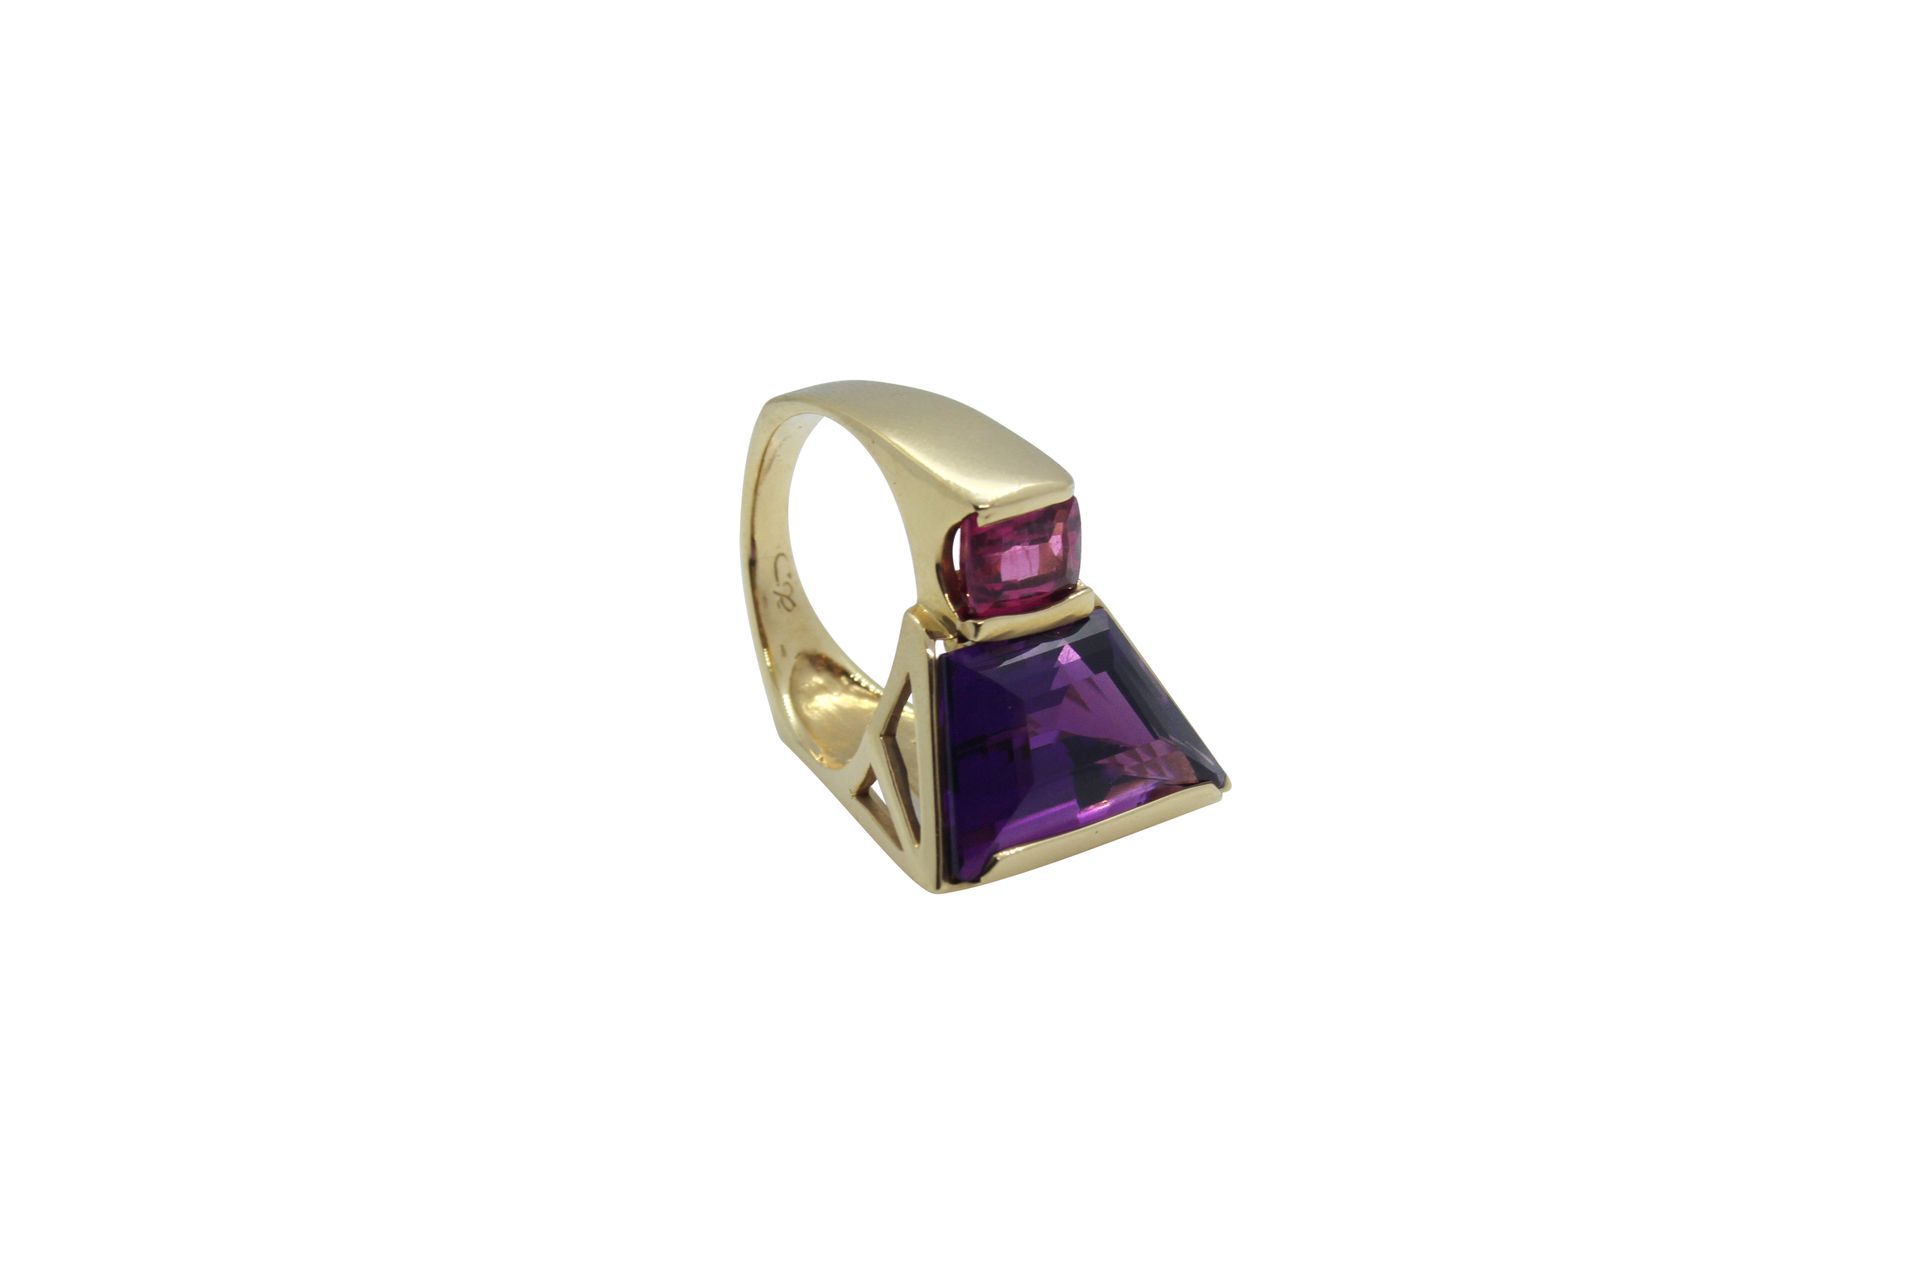 18k gold ring mounted with Tourmaline and Amethyst stones Anillo de oro de 18k m&hellip;